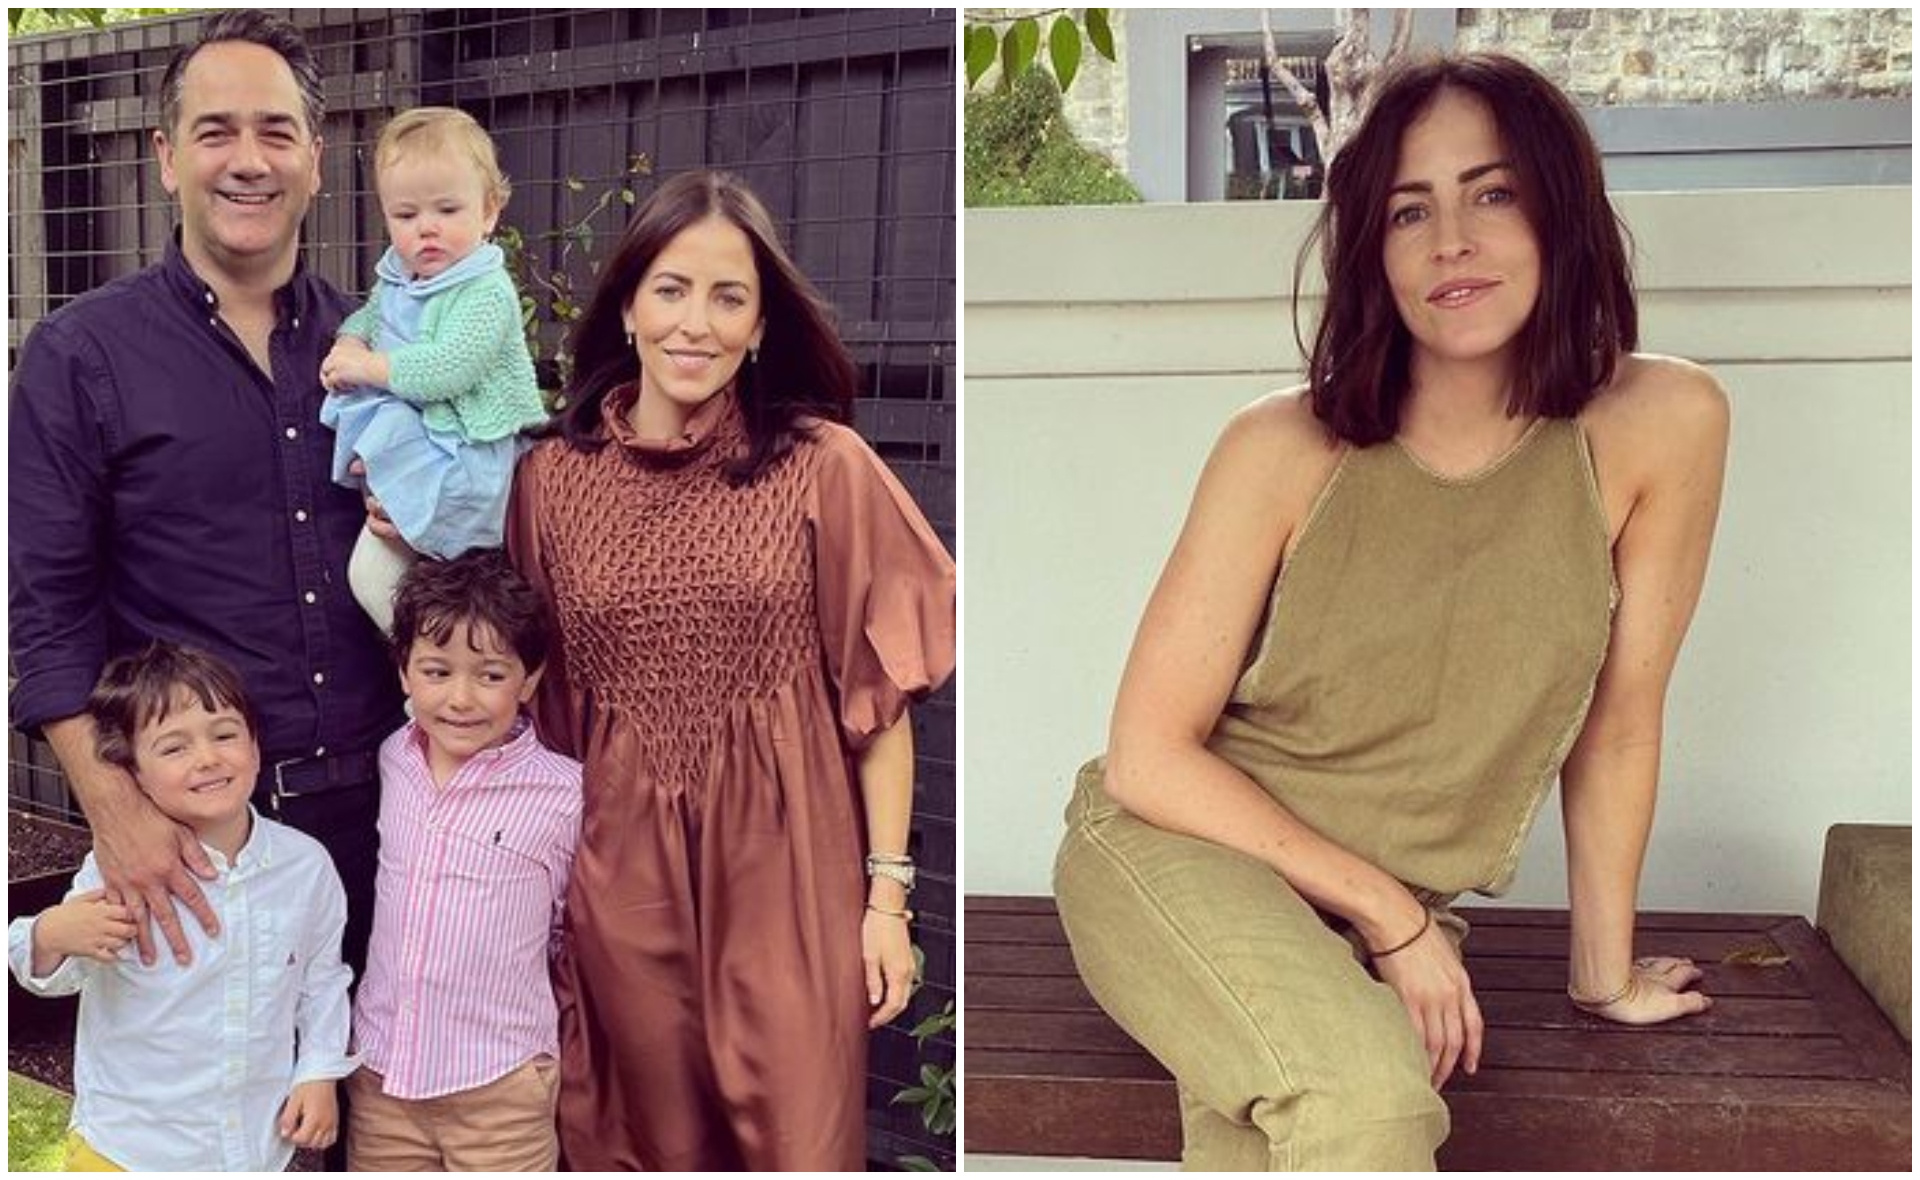 Wippa’s wife Lisa is the Aussie woman to watch if you’re after some fashion inspiration